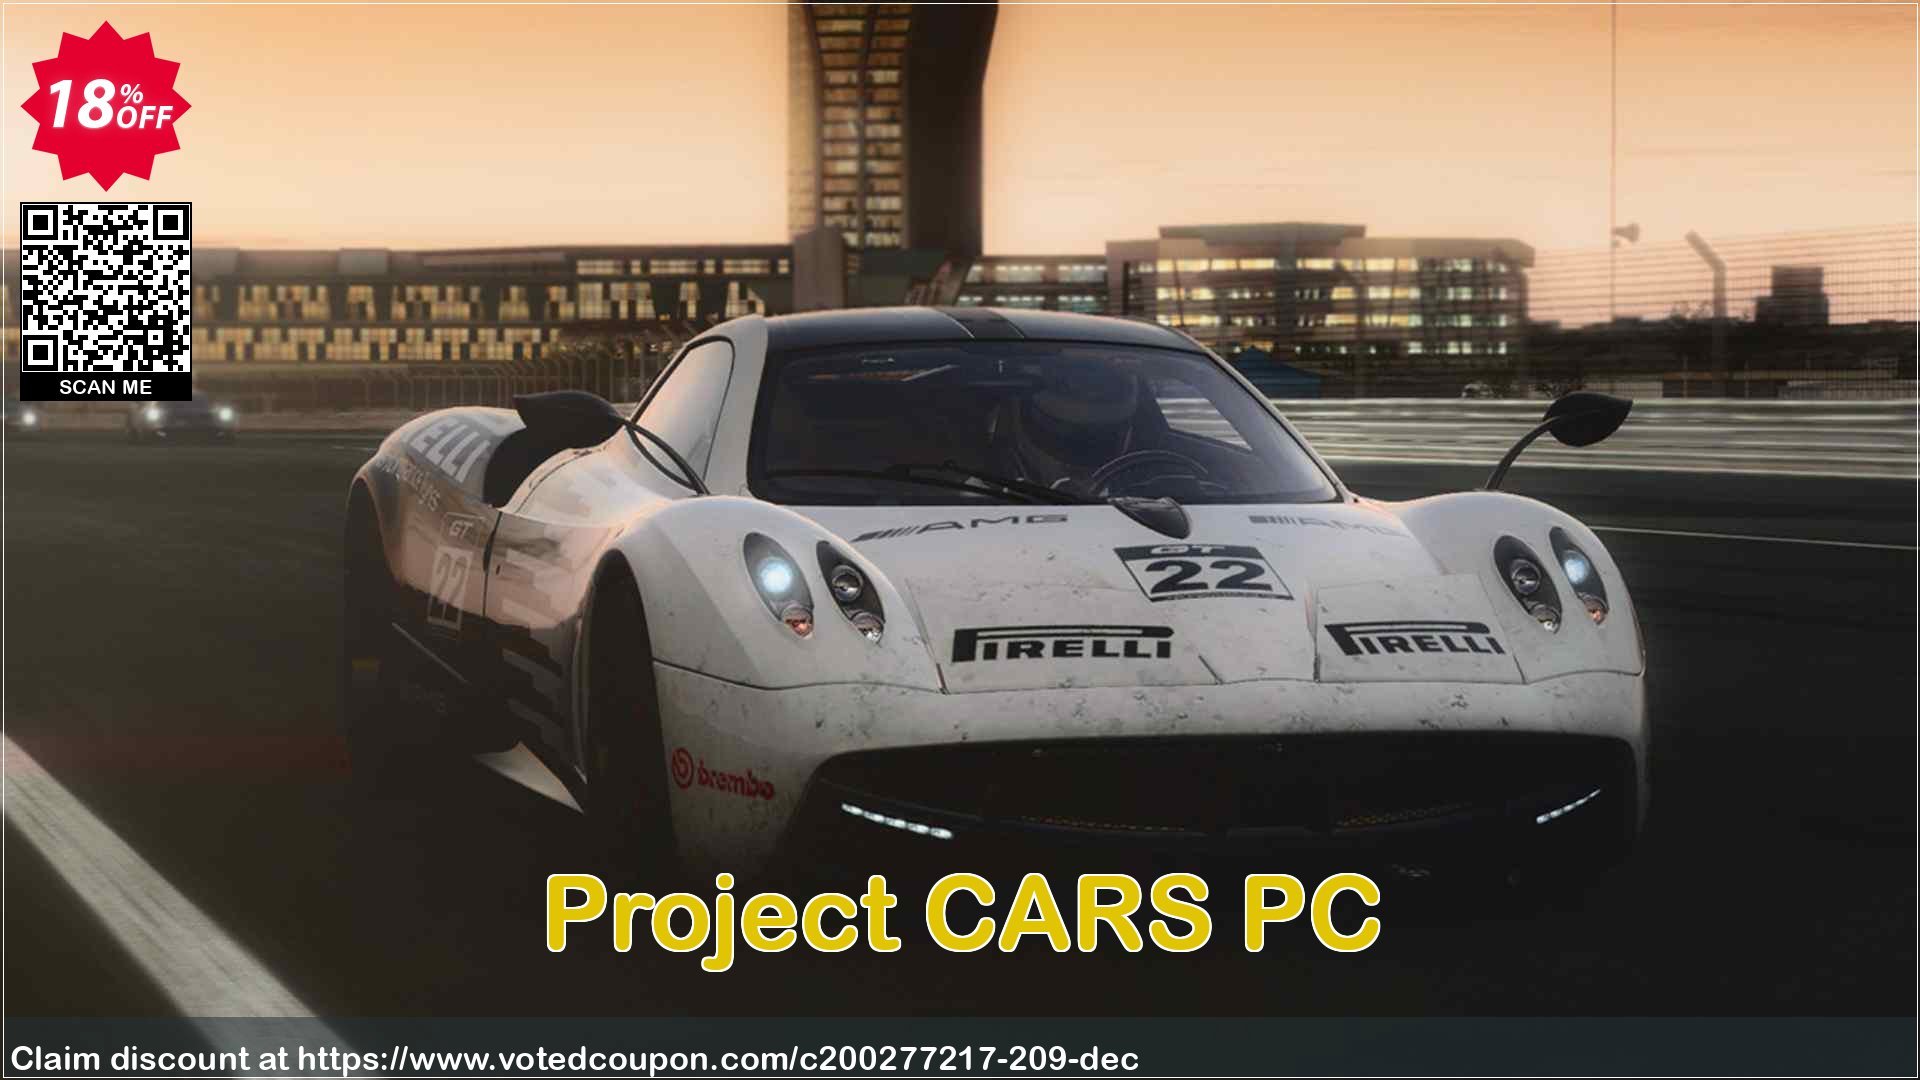 Project CARS PC voted-on promotion codes